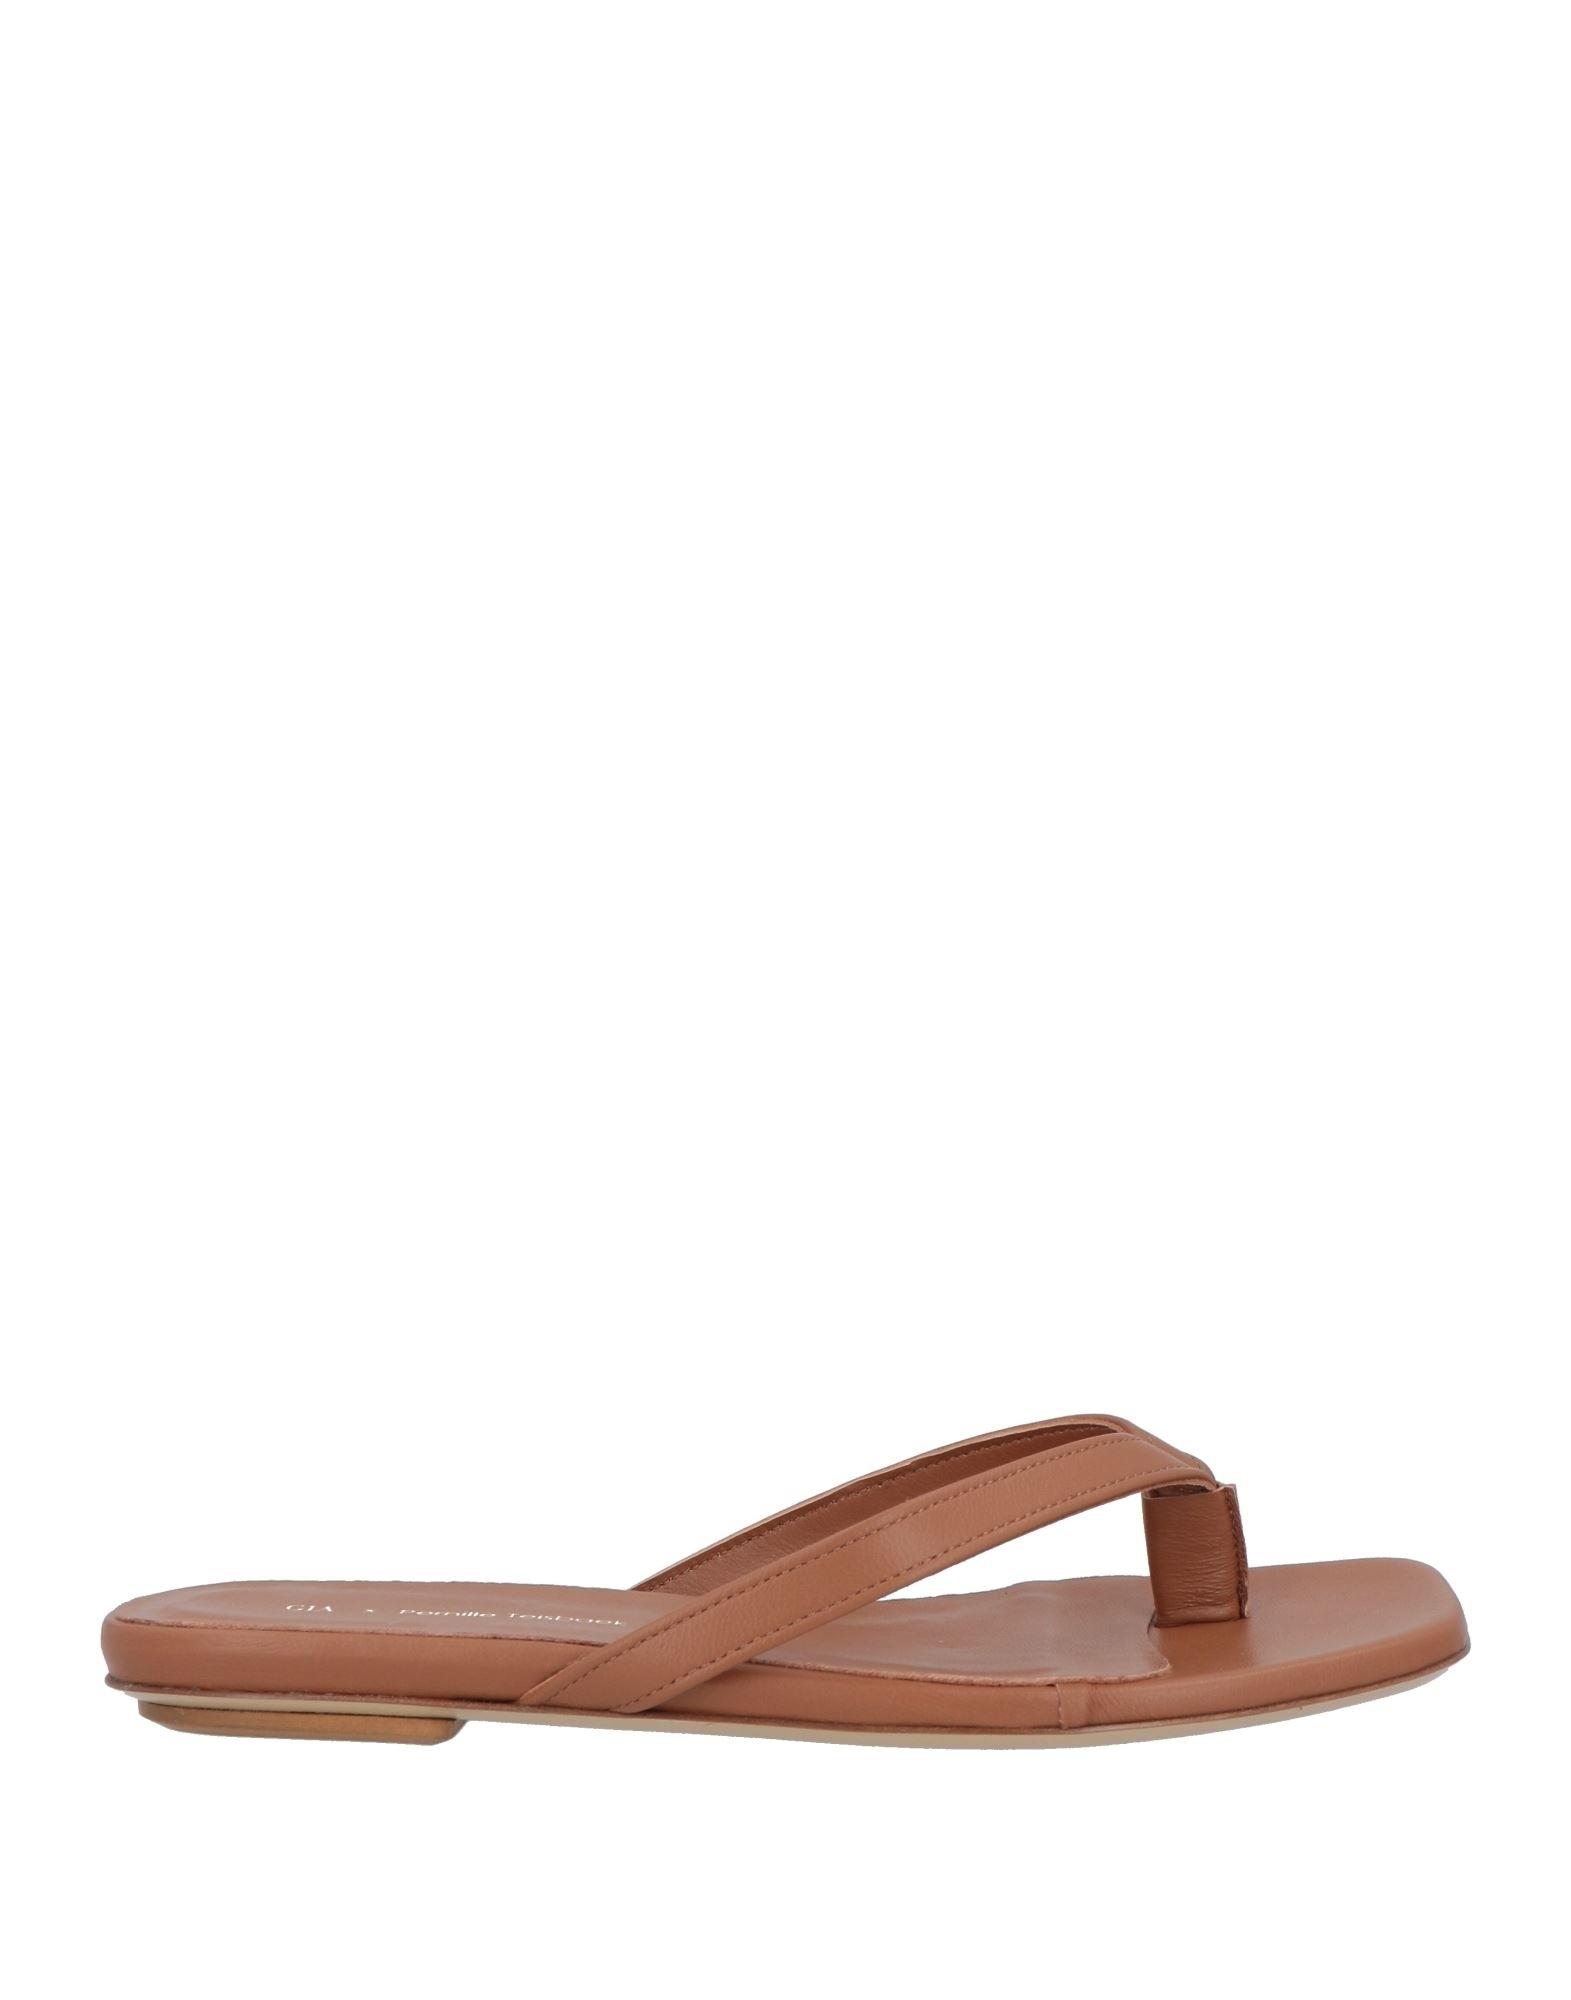 GIA X PERNILLE Toe Post Sandals in Brown | Lyst